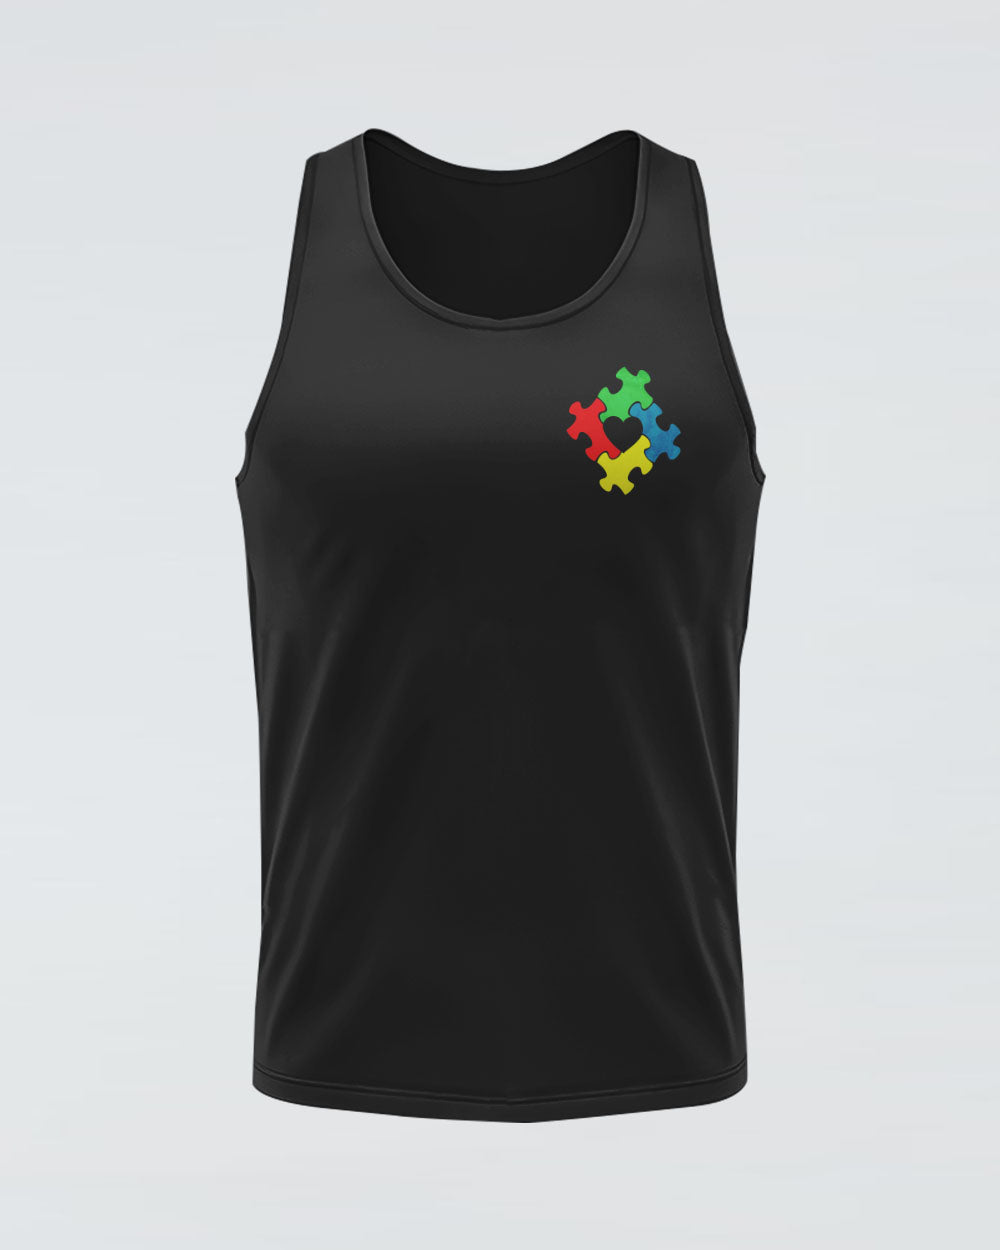 It Takes A Special Mom To Hear What A Son Cannot Say Dinosaur Women's Autism Awareness Tanks